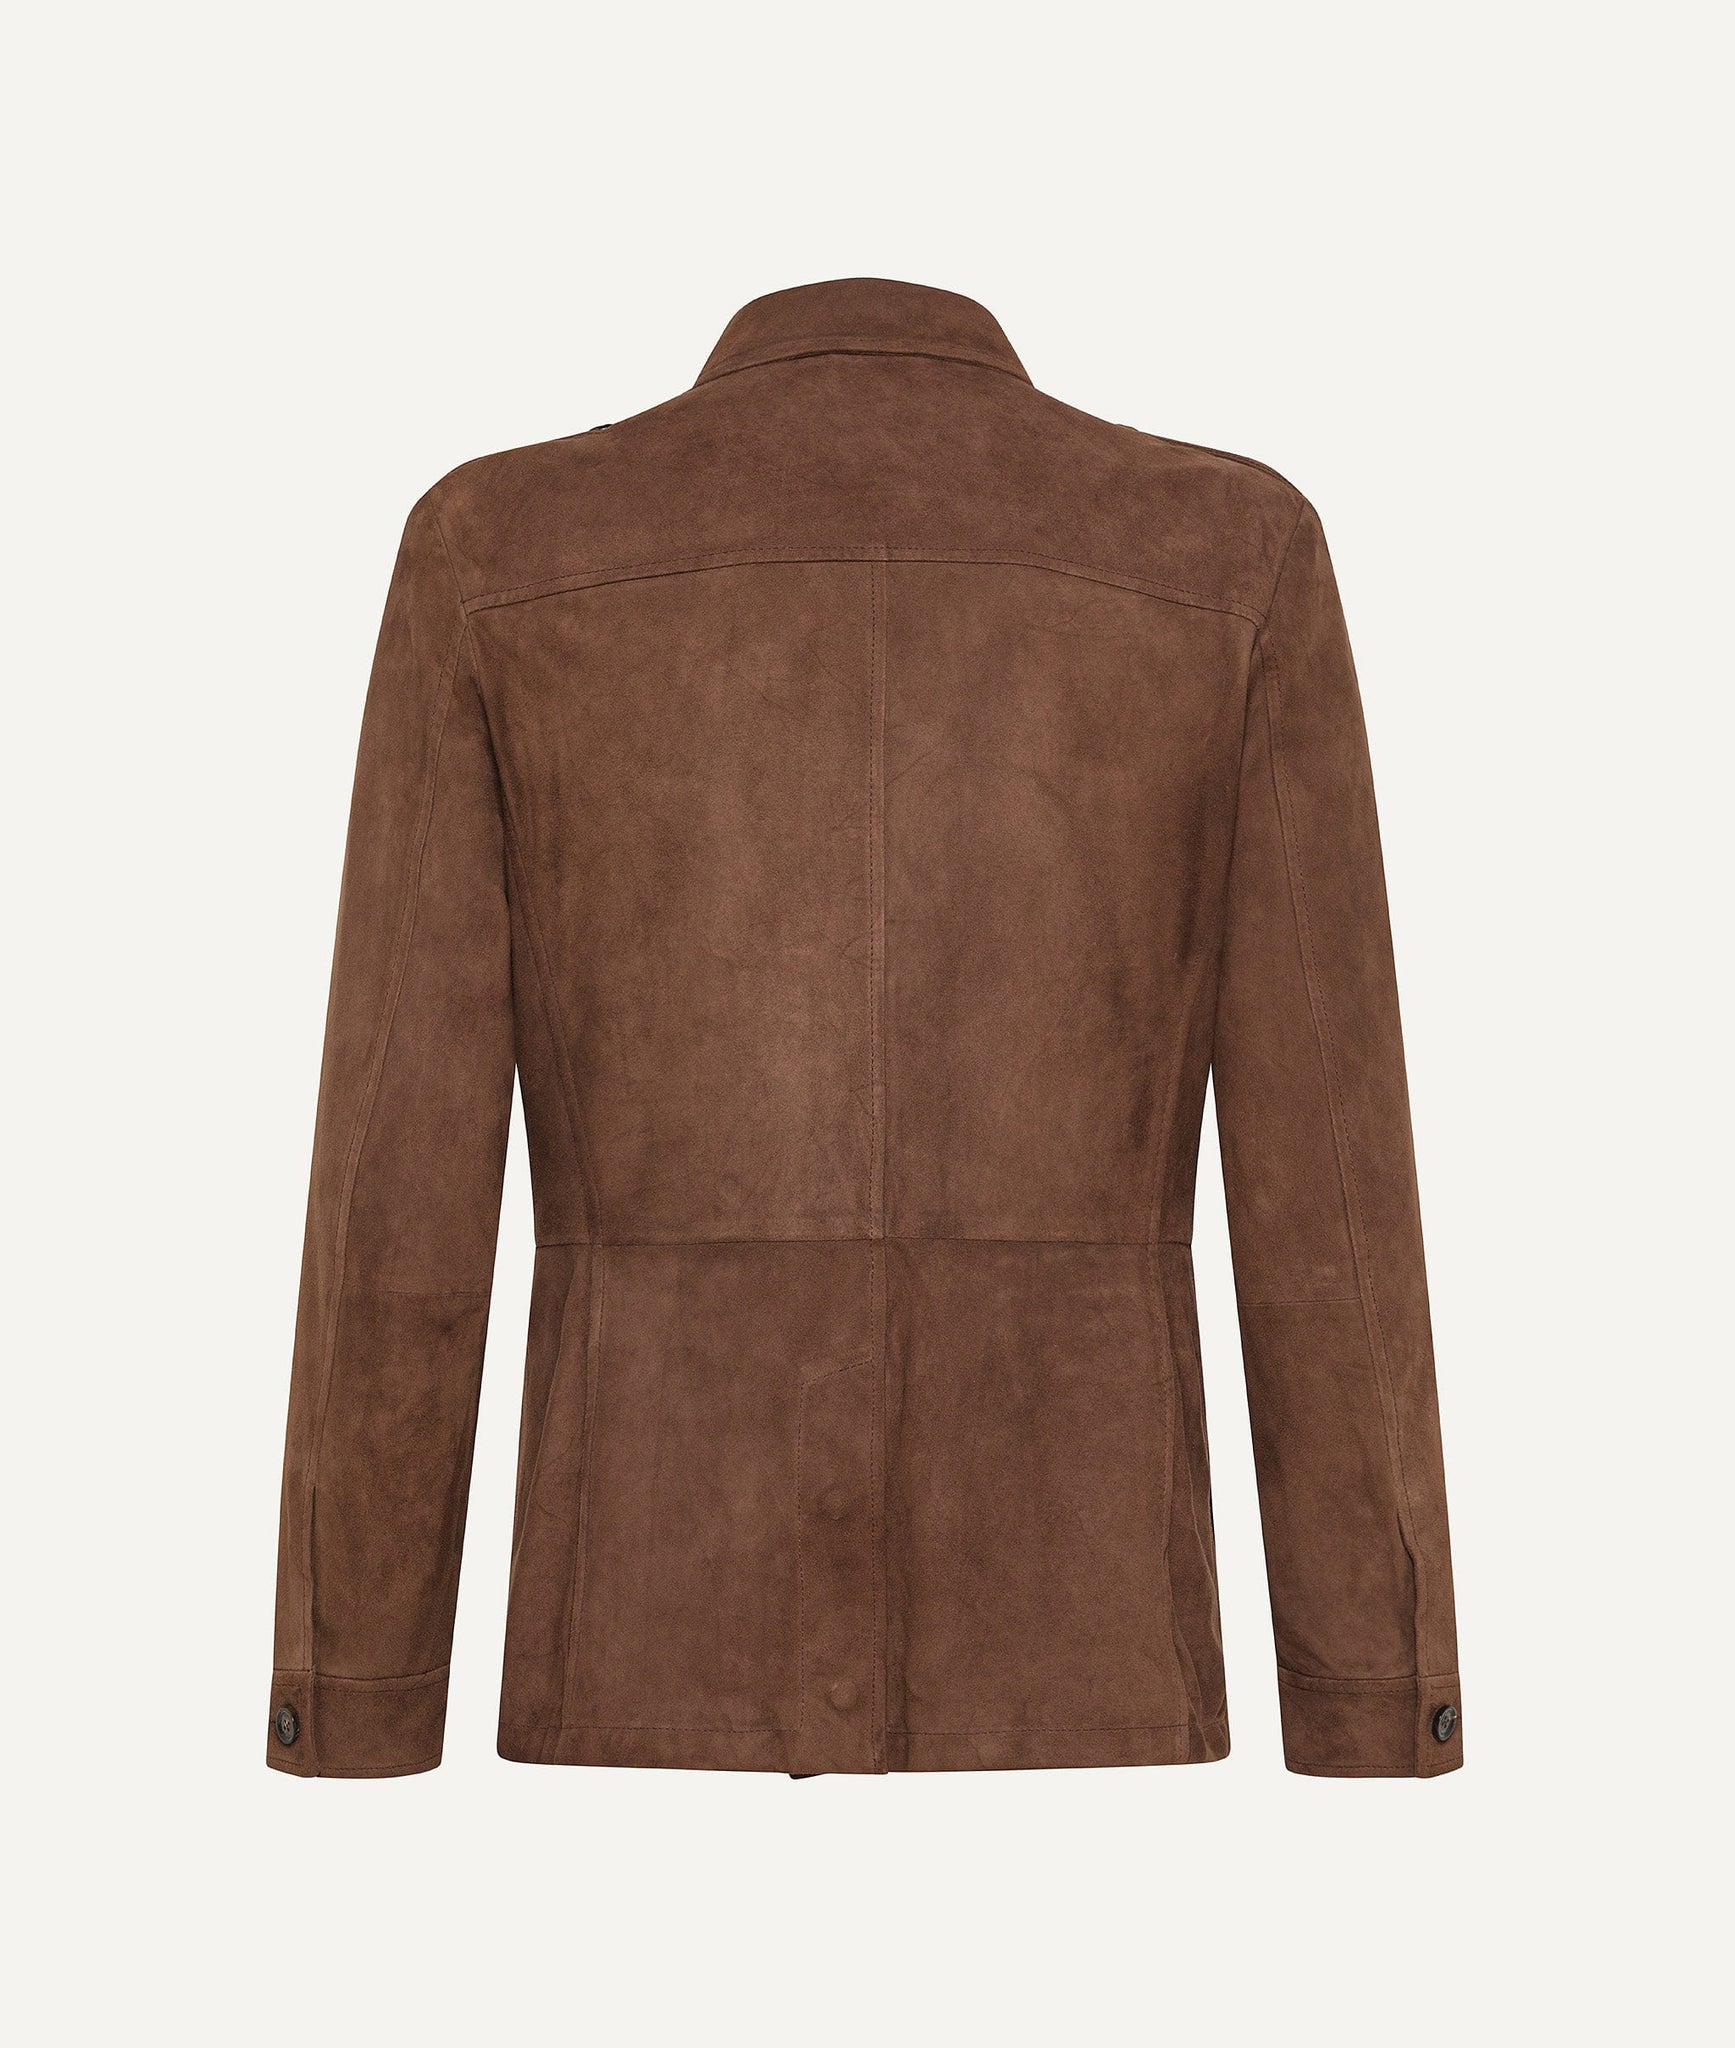 Eleventy - Leather Jacket in Suede